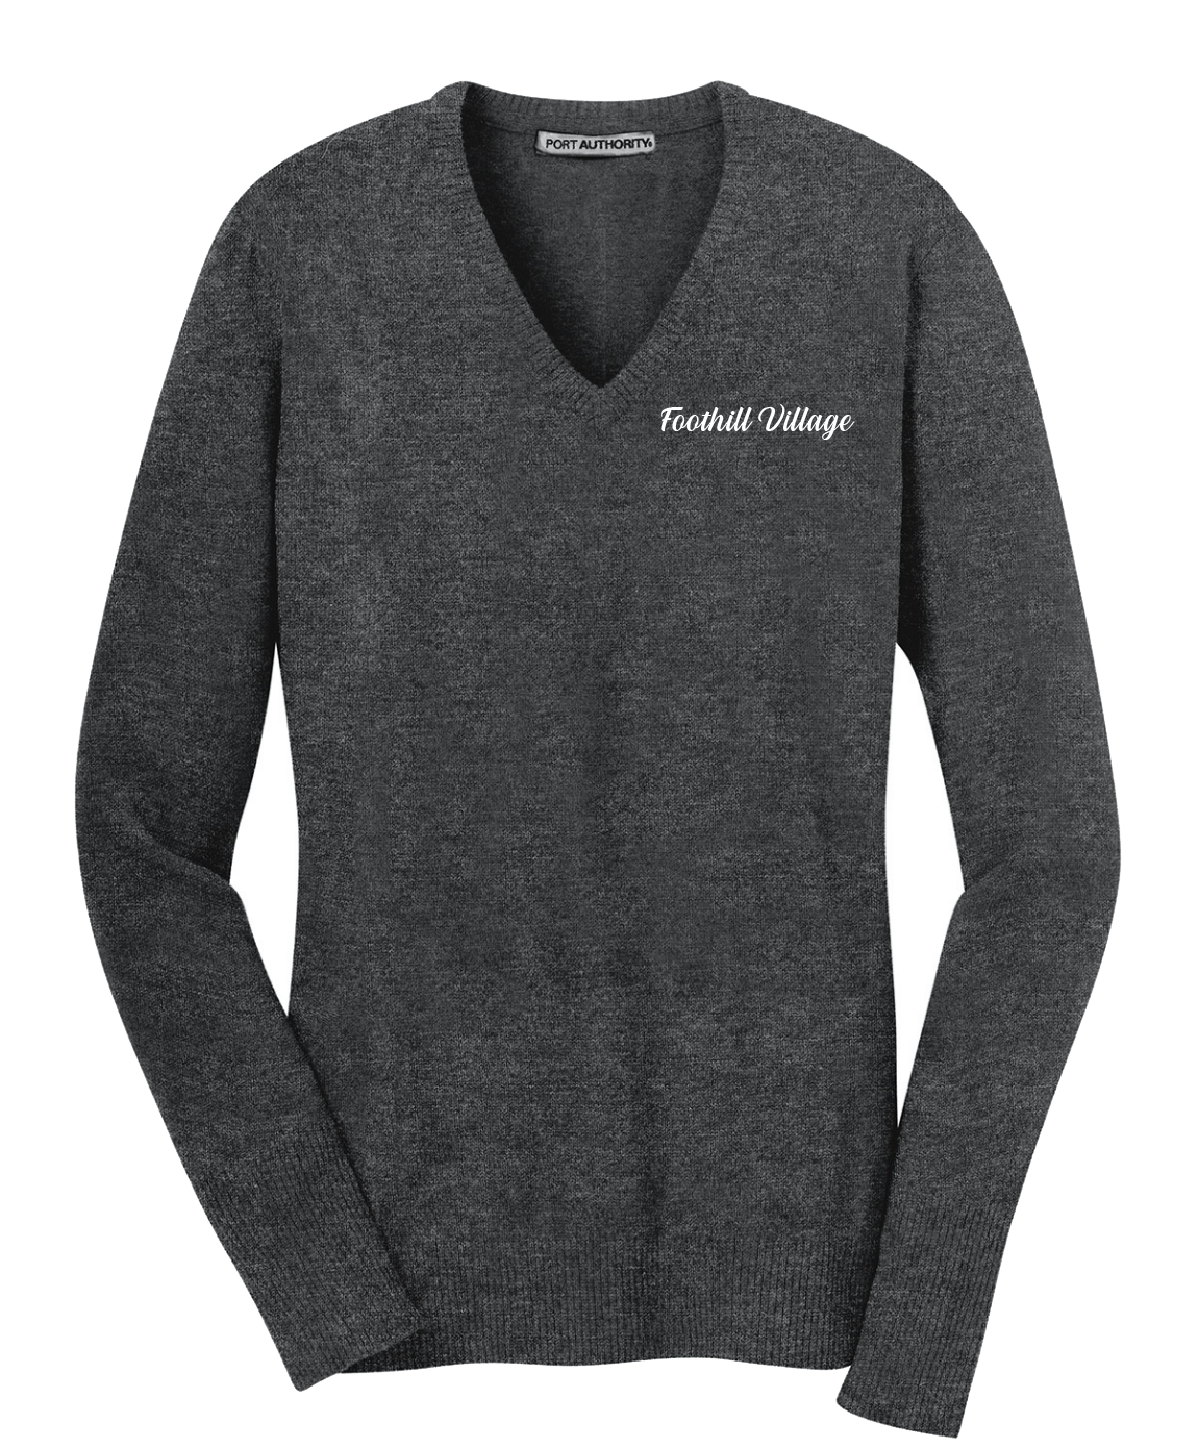 Foothill Village - Port Authority® Ladies V-Neck Sweater